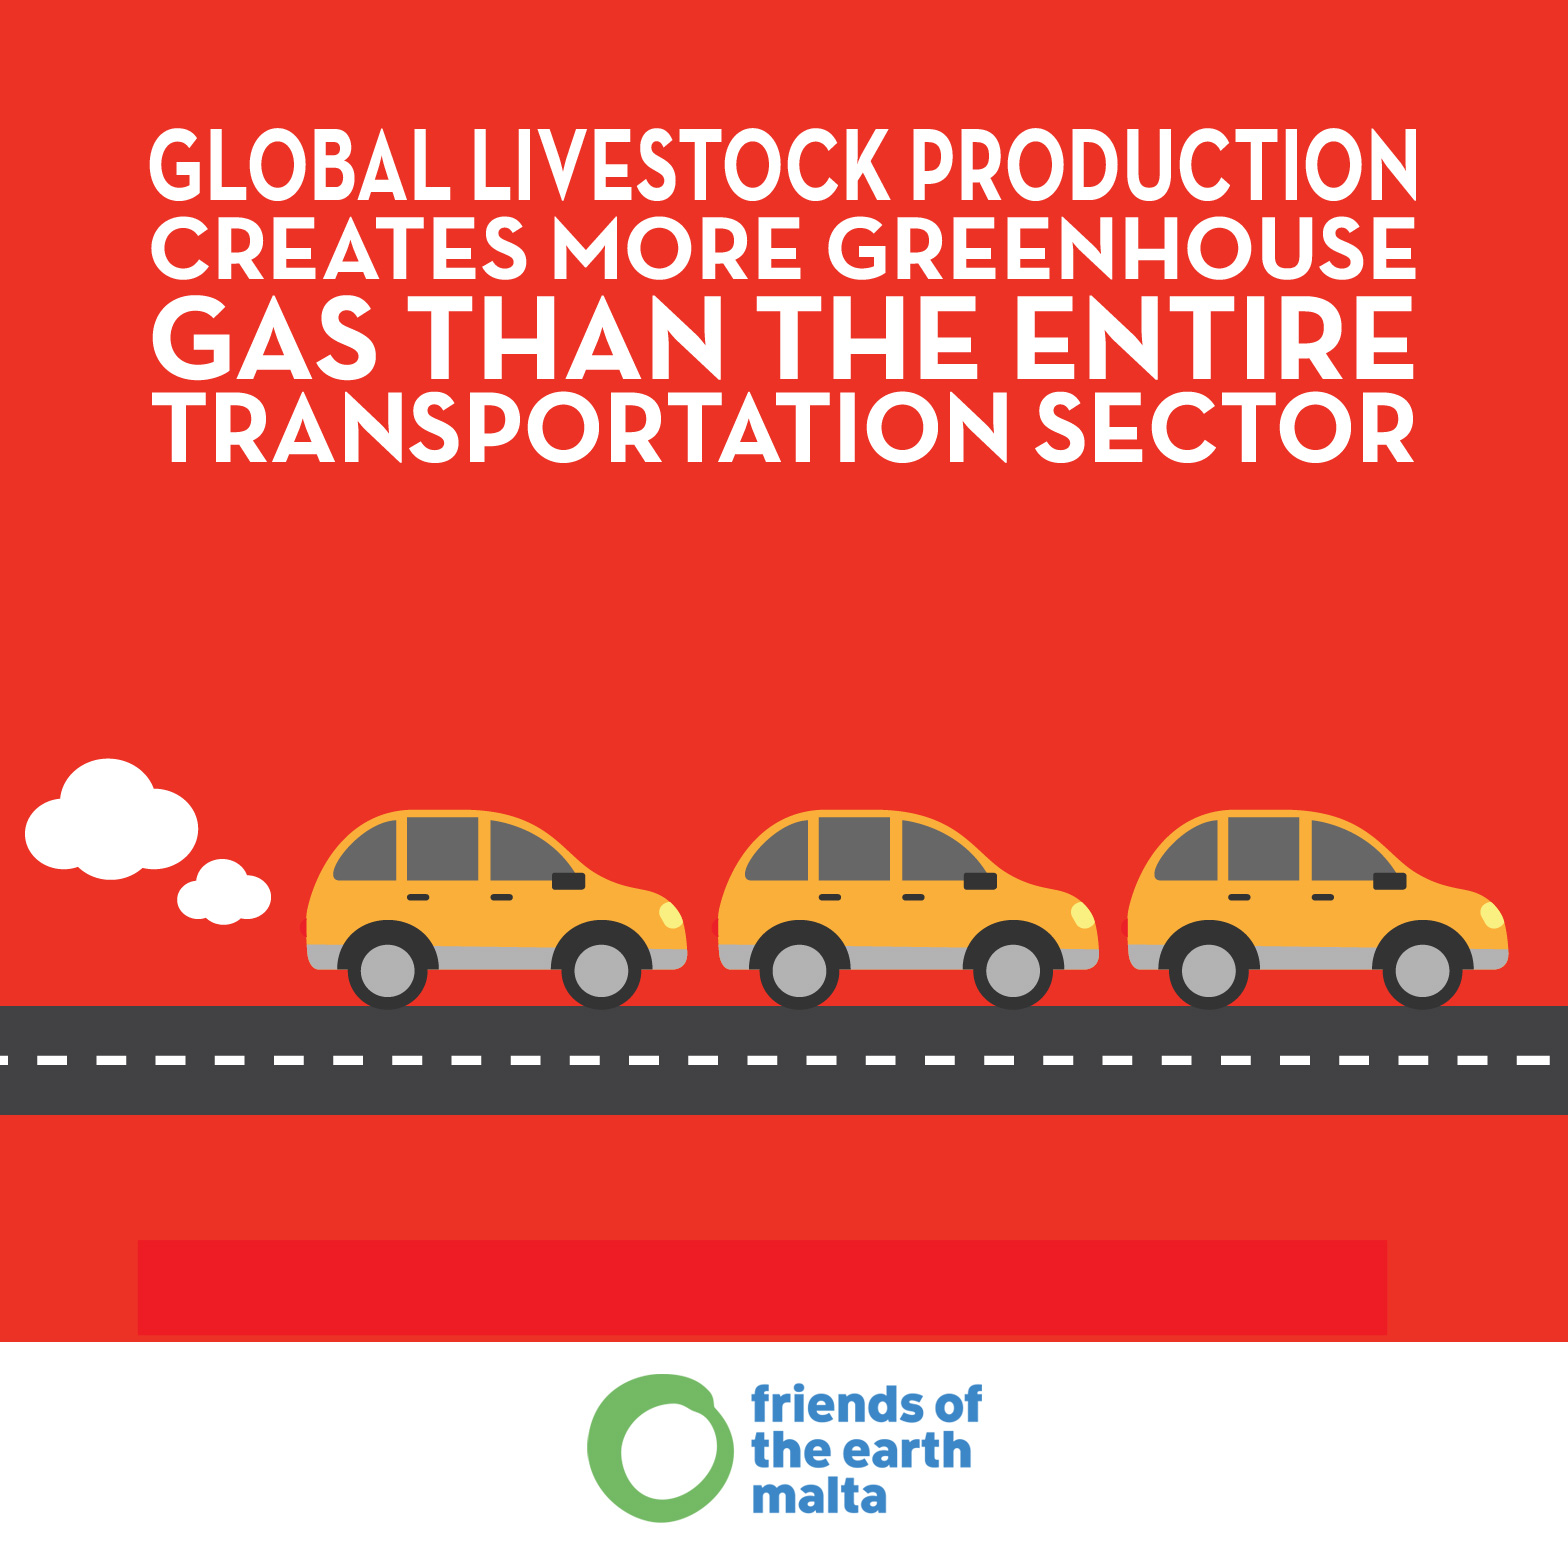 Global livestock production creates more greenhouse gas than the entire transportation sector